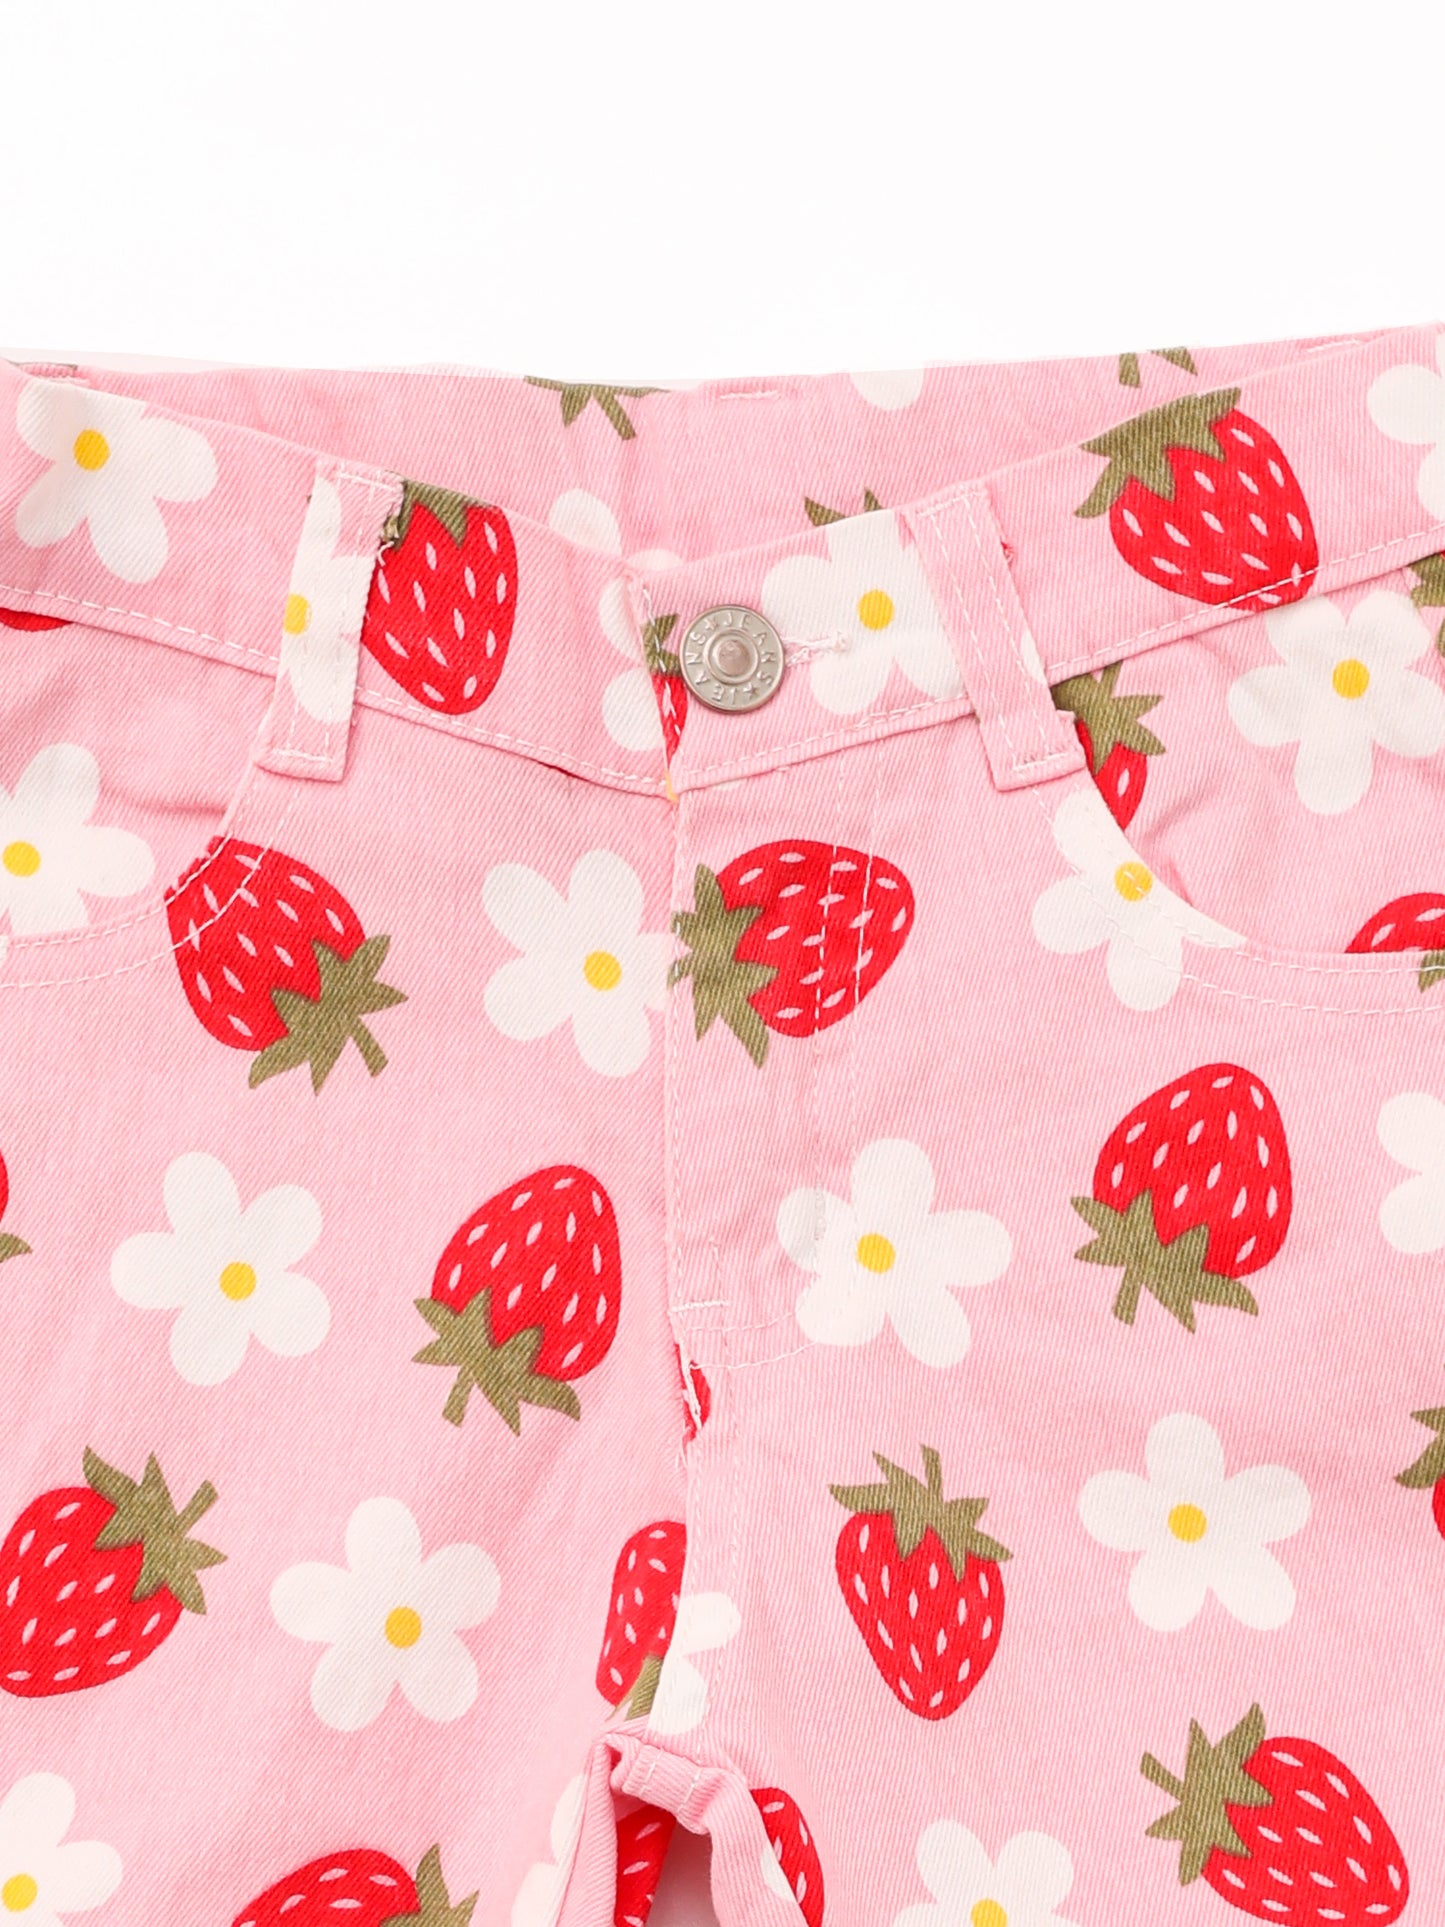 Baby Girls Strawberry Printed Flare Jeans